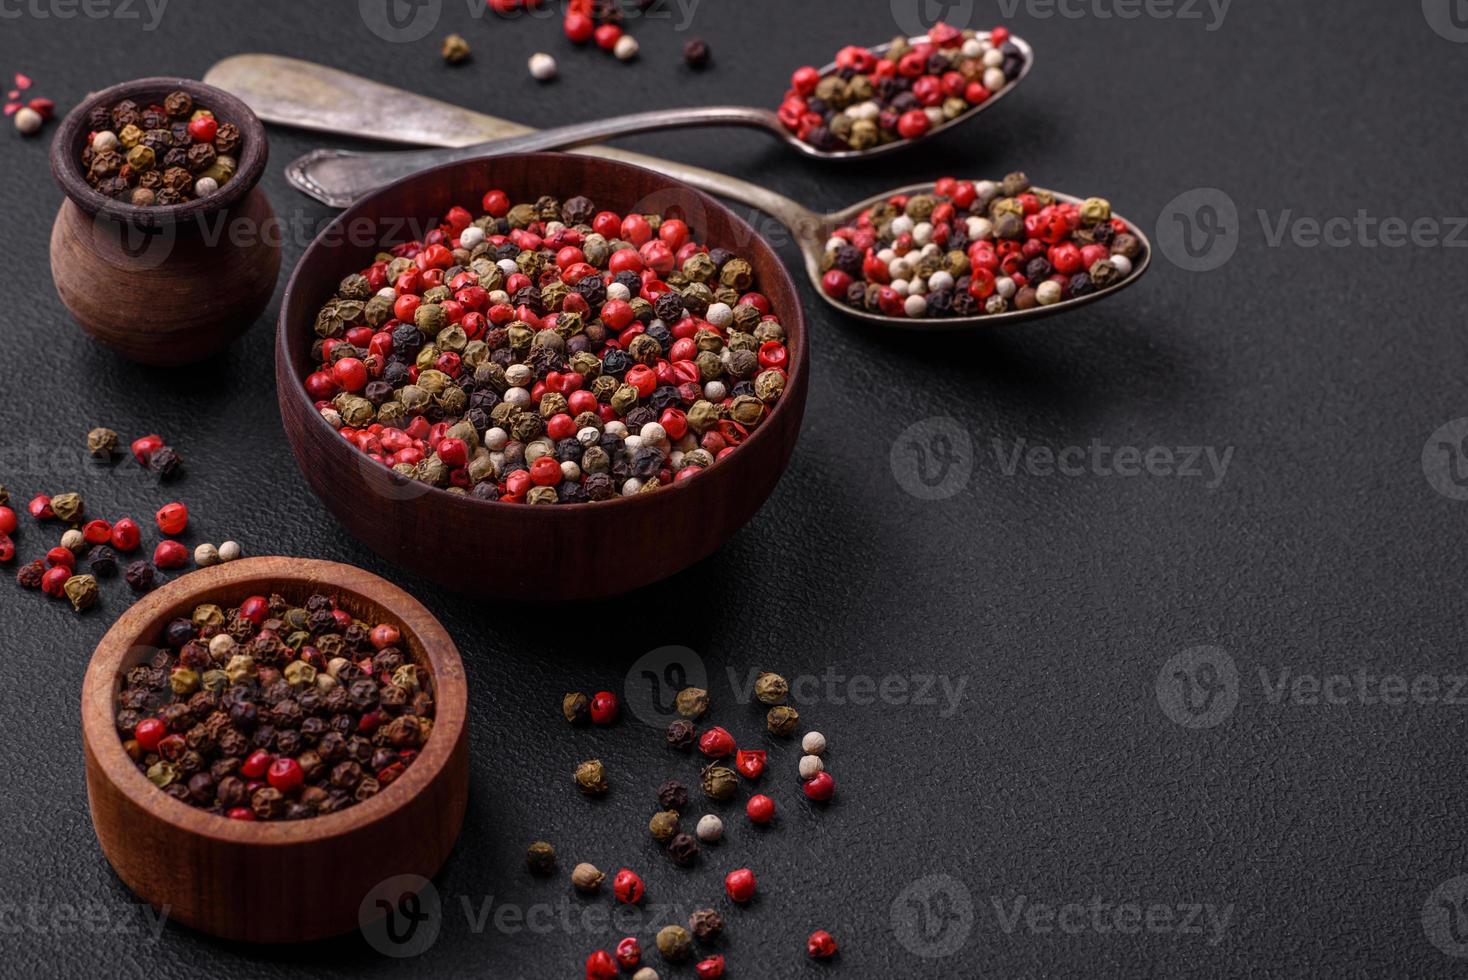 Spice allspice of different colors pink, white, green not ground in a wooden saucer photo